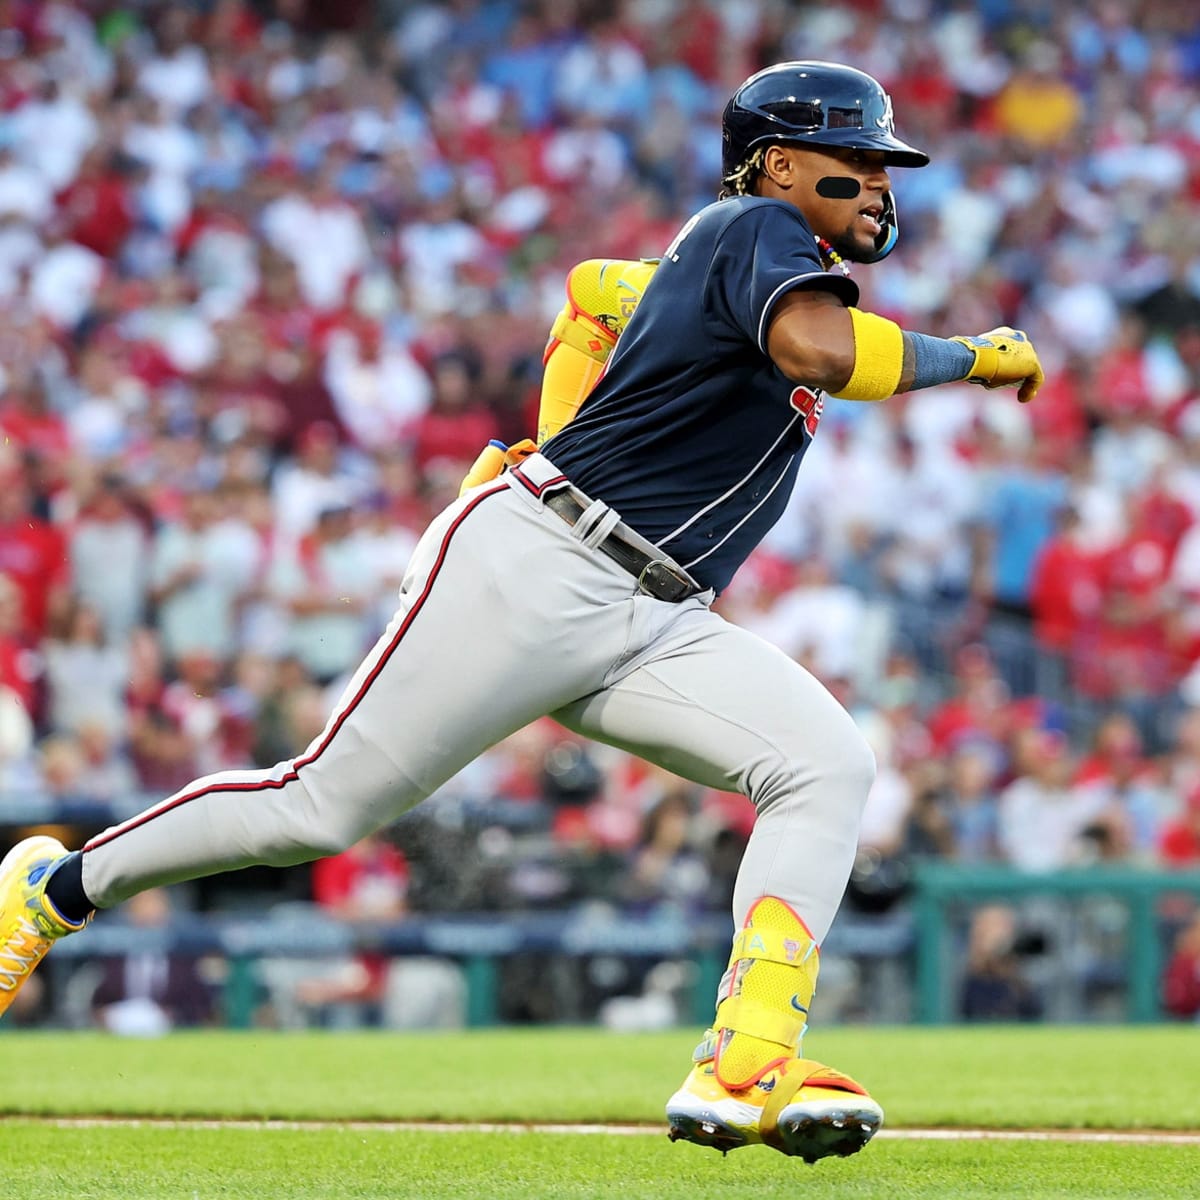 Braves star Ronald Acuña Jr. is dealing with some right knee irritation –  WWLP